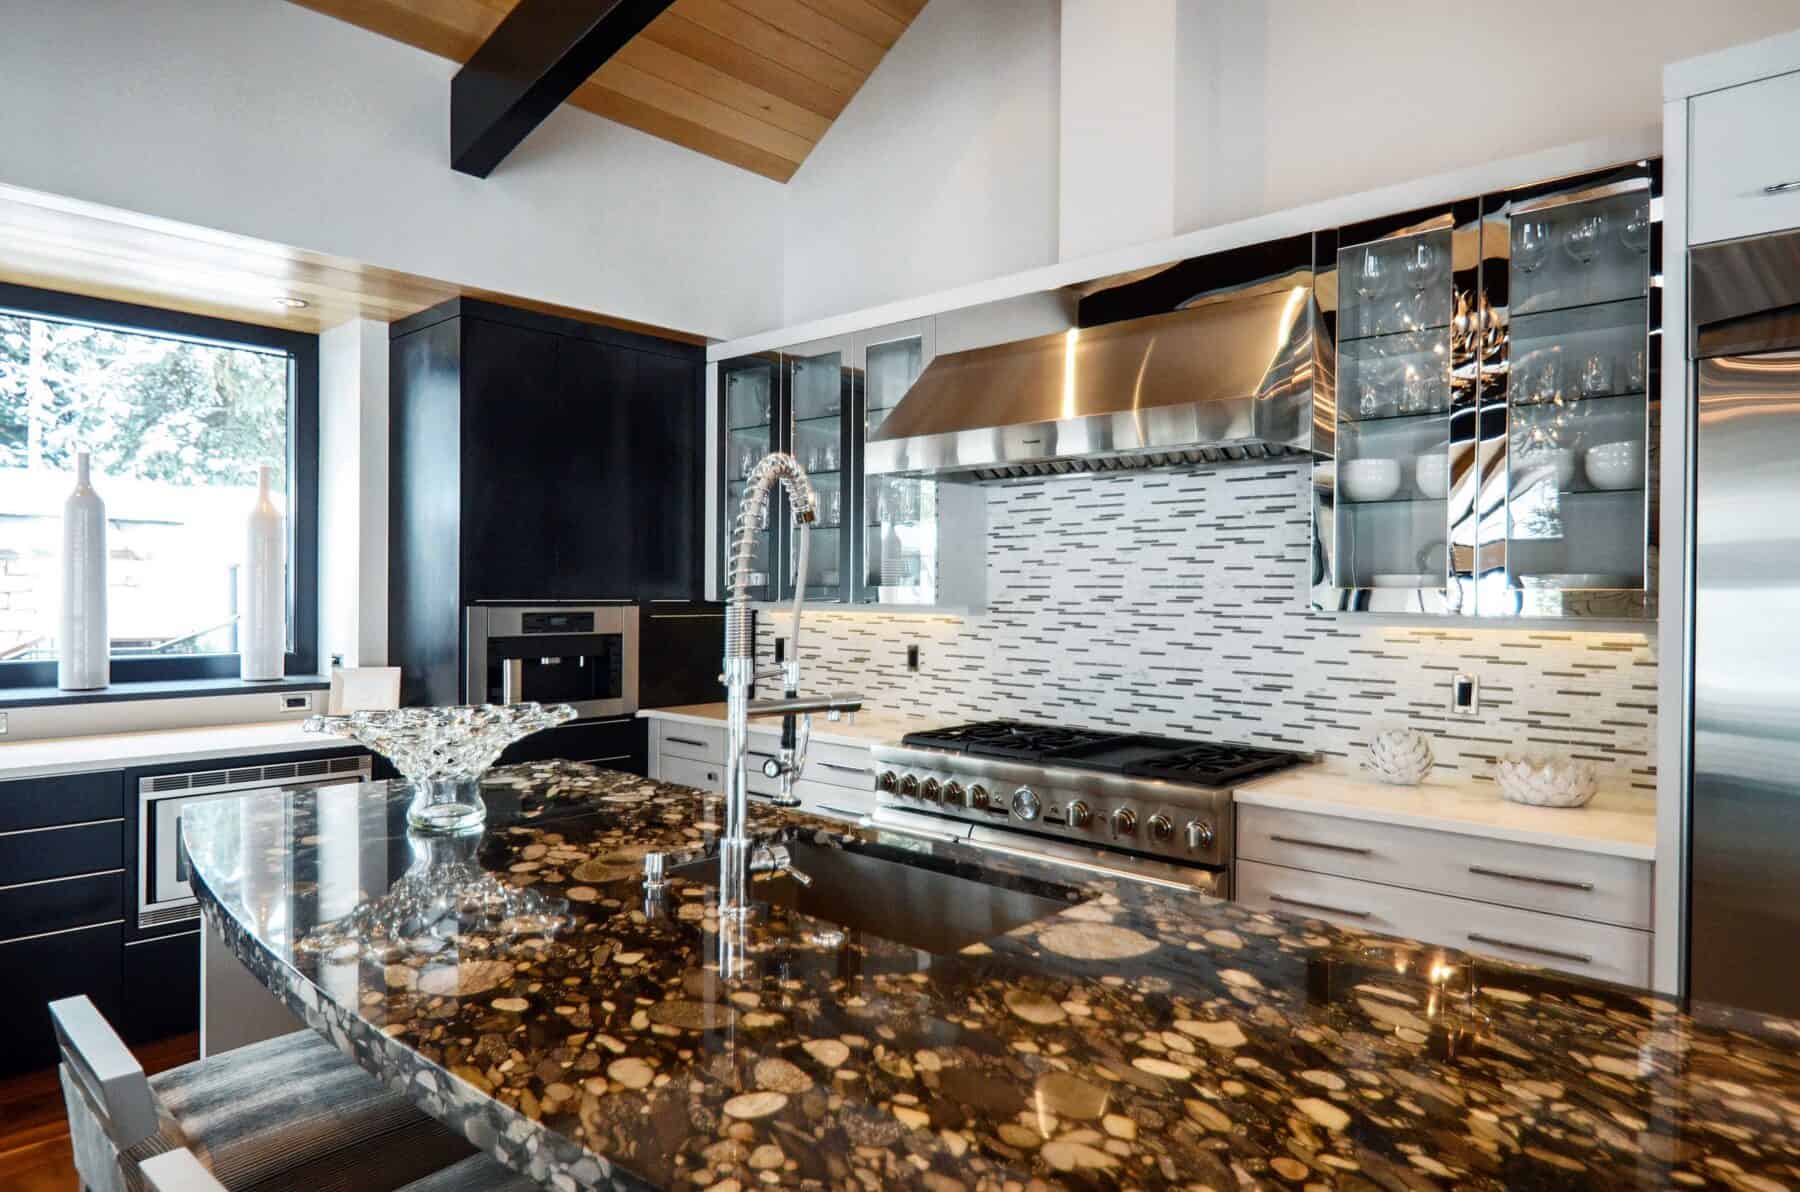 Kitchen with Marinace River Rock Island in Aspen, Colorado Custom Home. Luxury Home Building Interiors